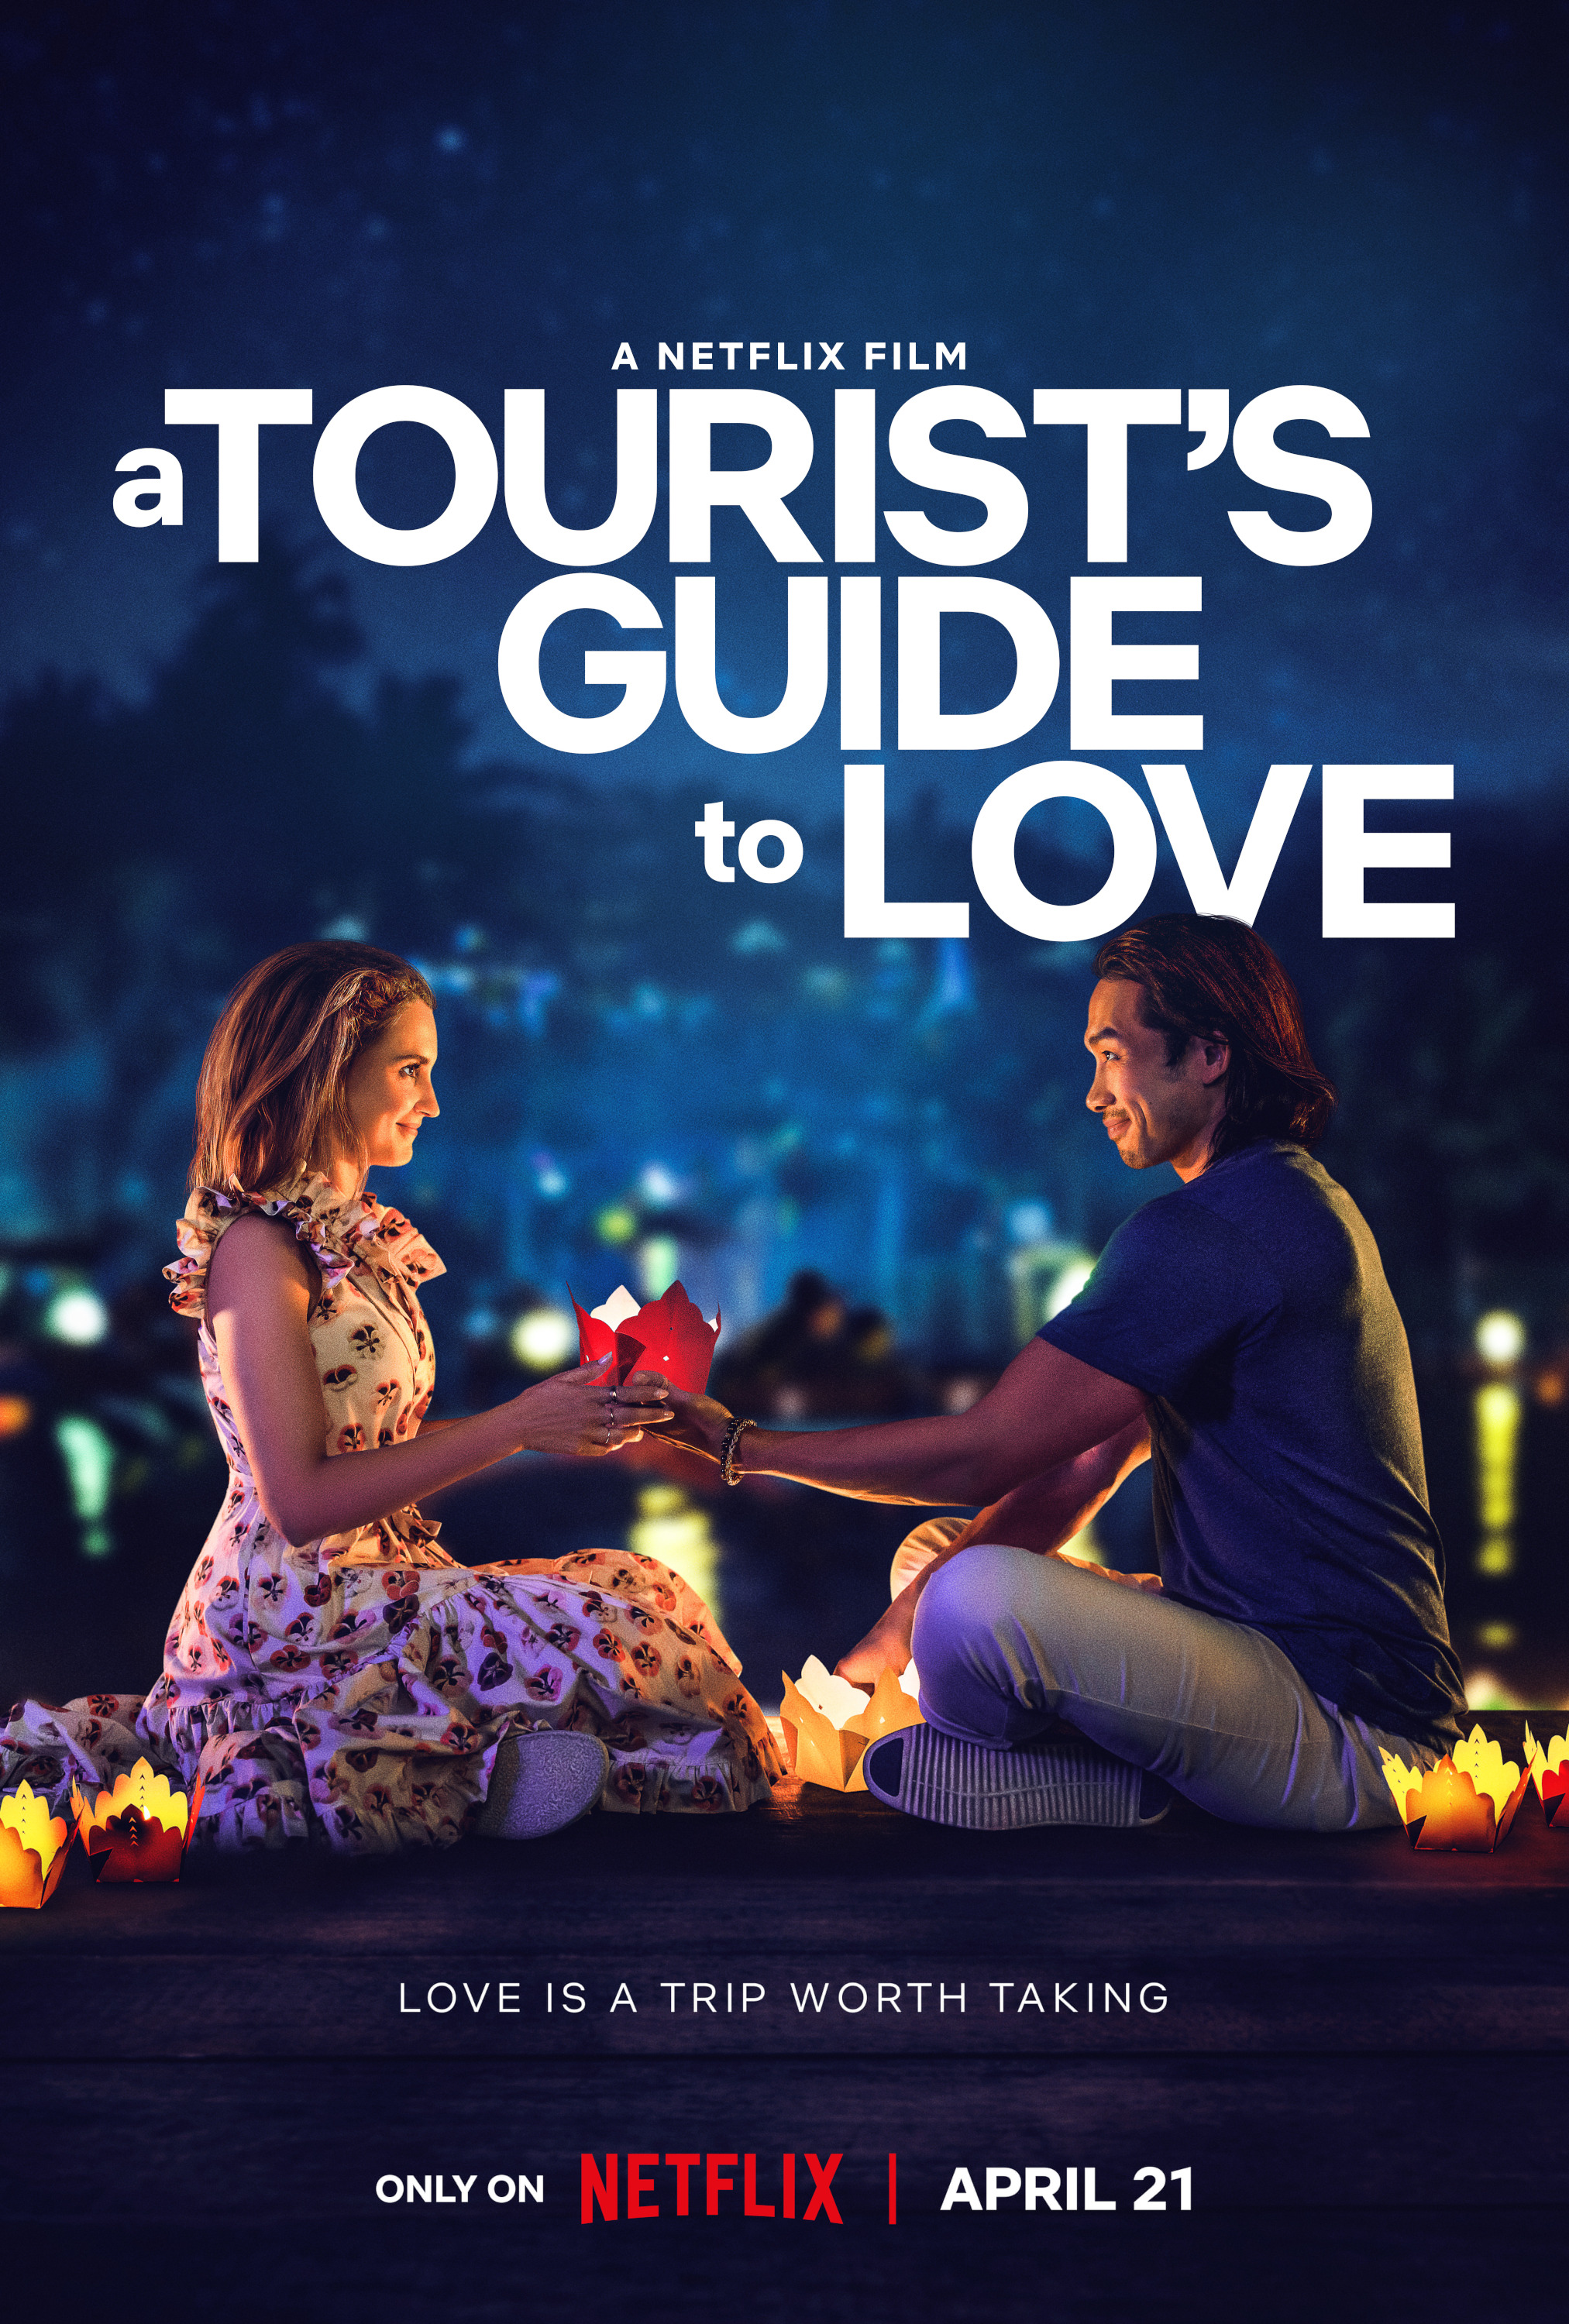 Mega Sized Movie Poster Image for A Tourist's Guide to Love 